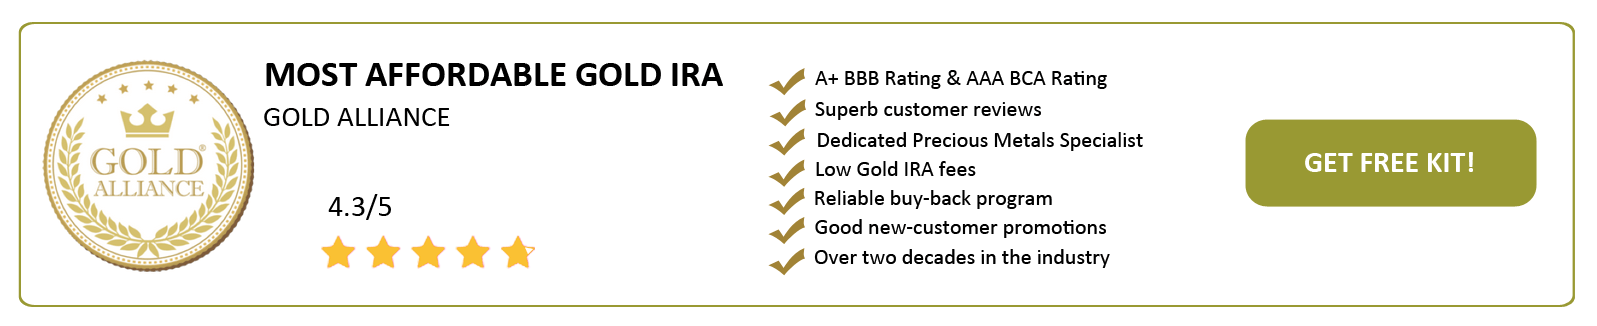 Gold Alliance: Most Affordable Gold IRA